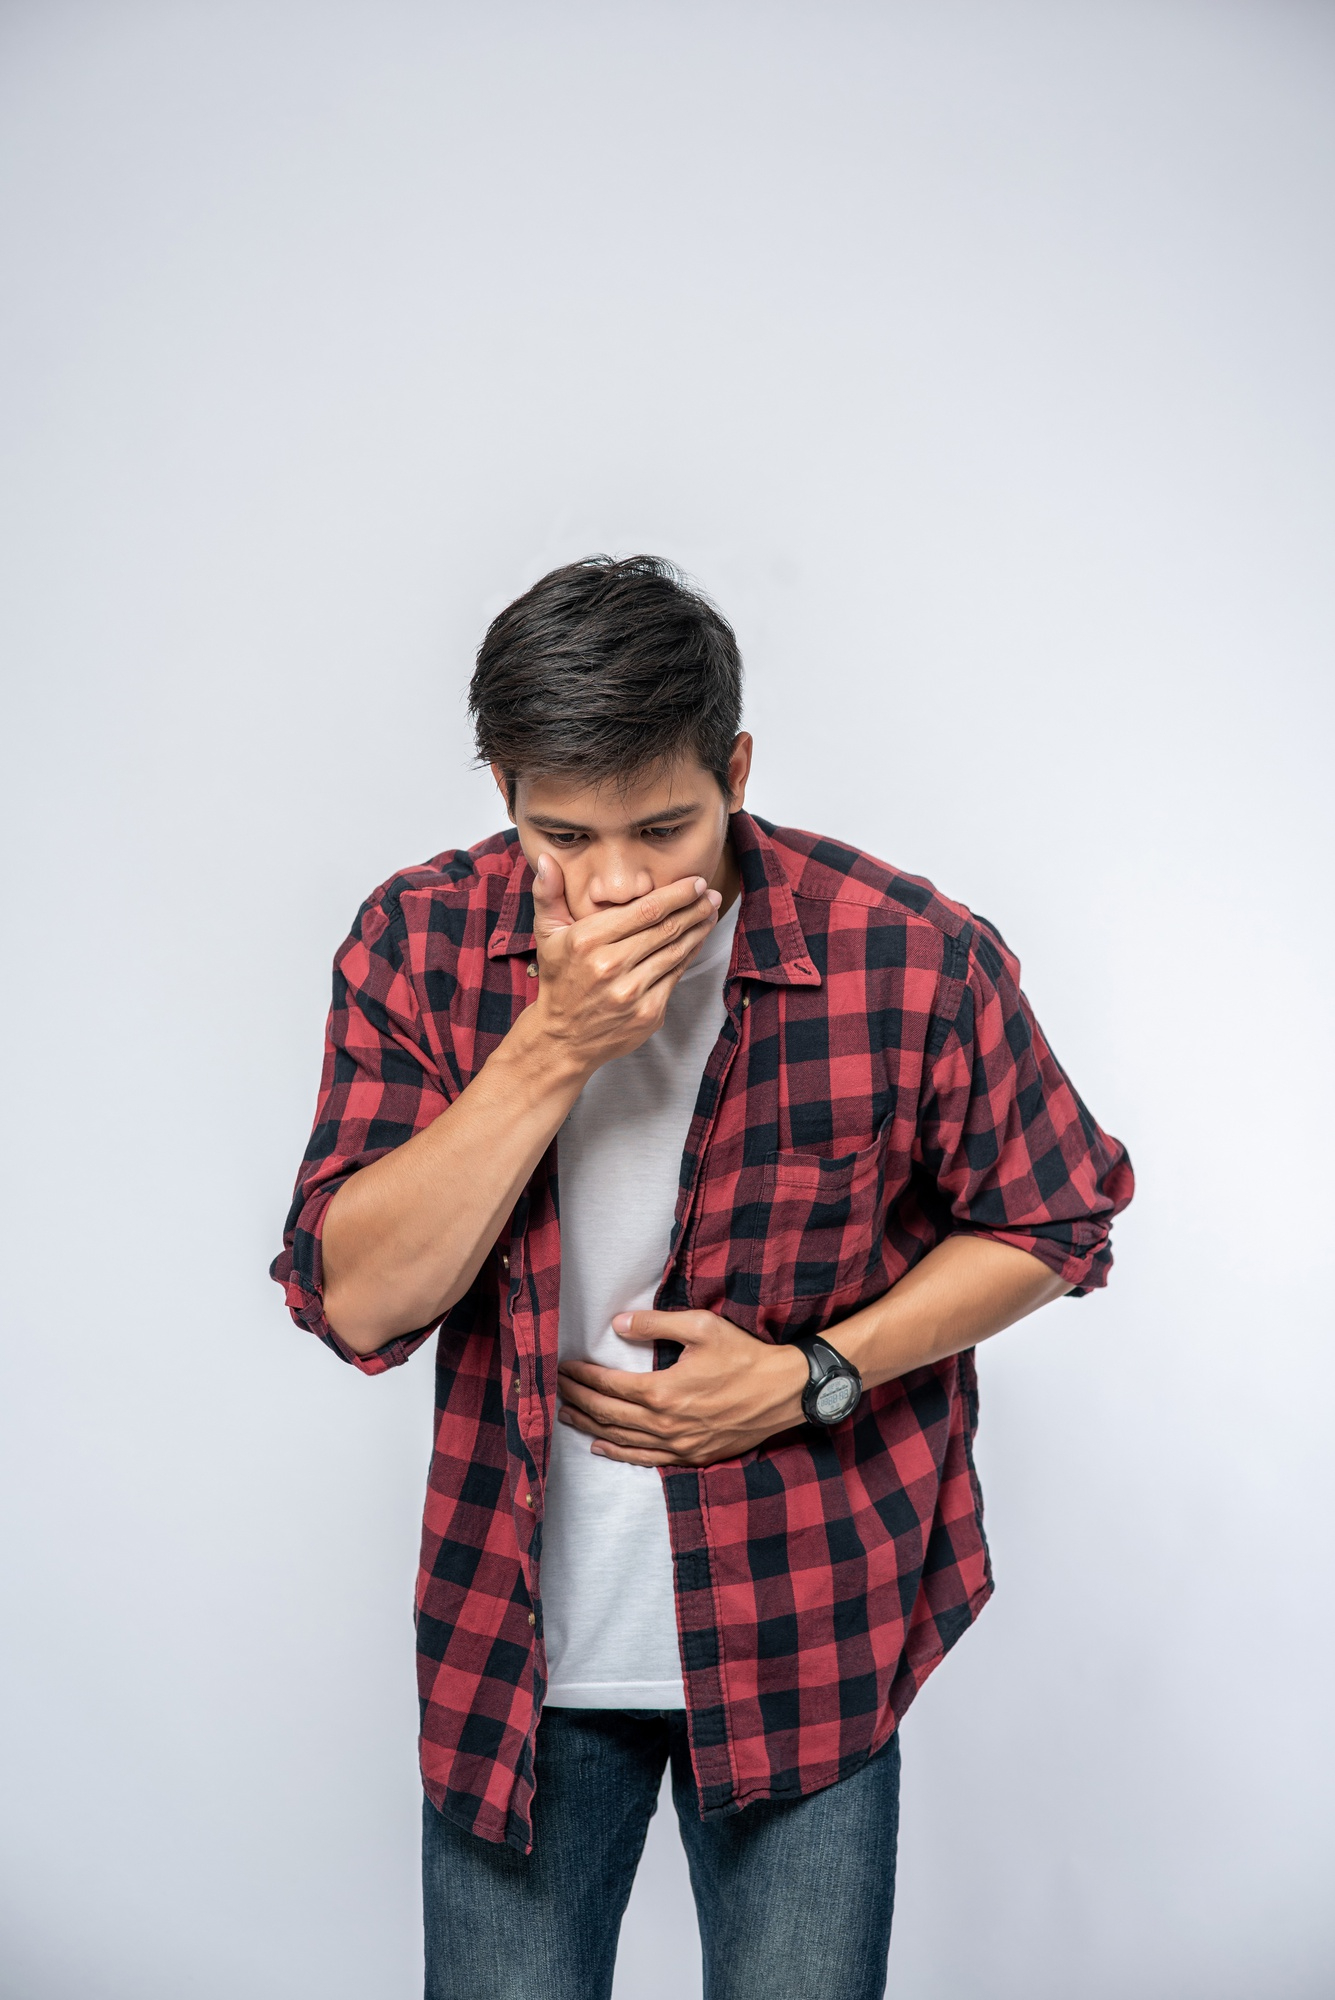 male patient with Crohn's disease about to vomit